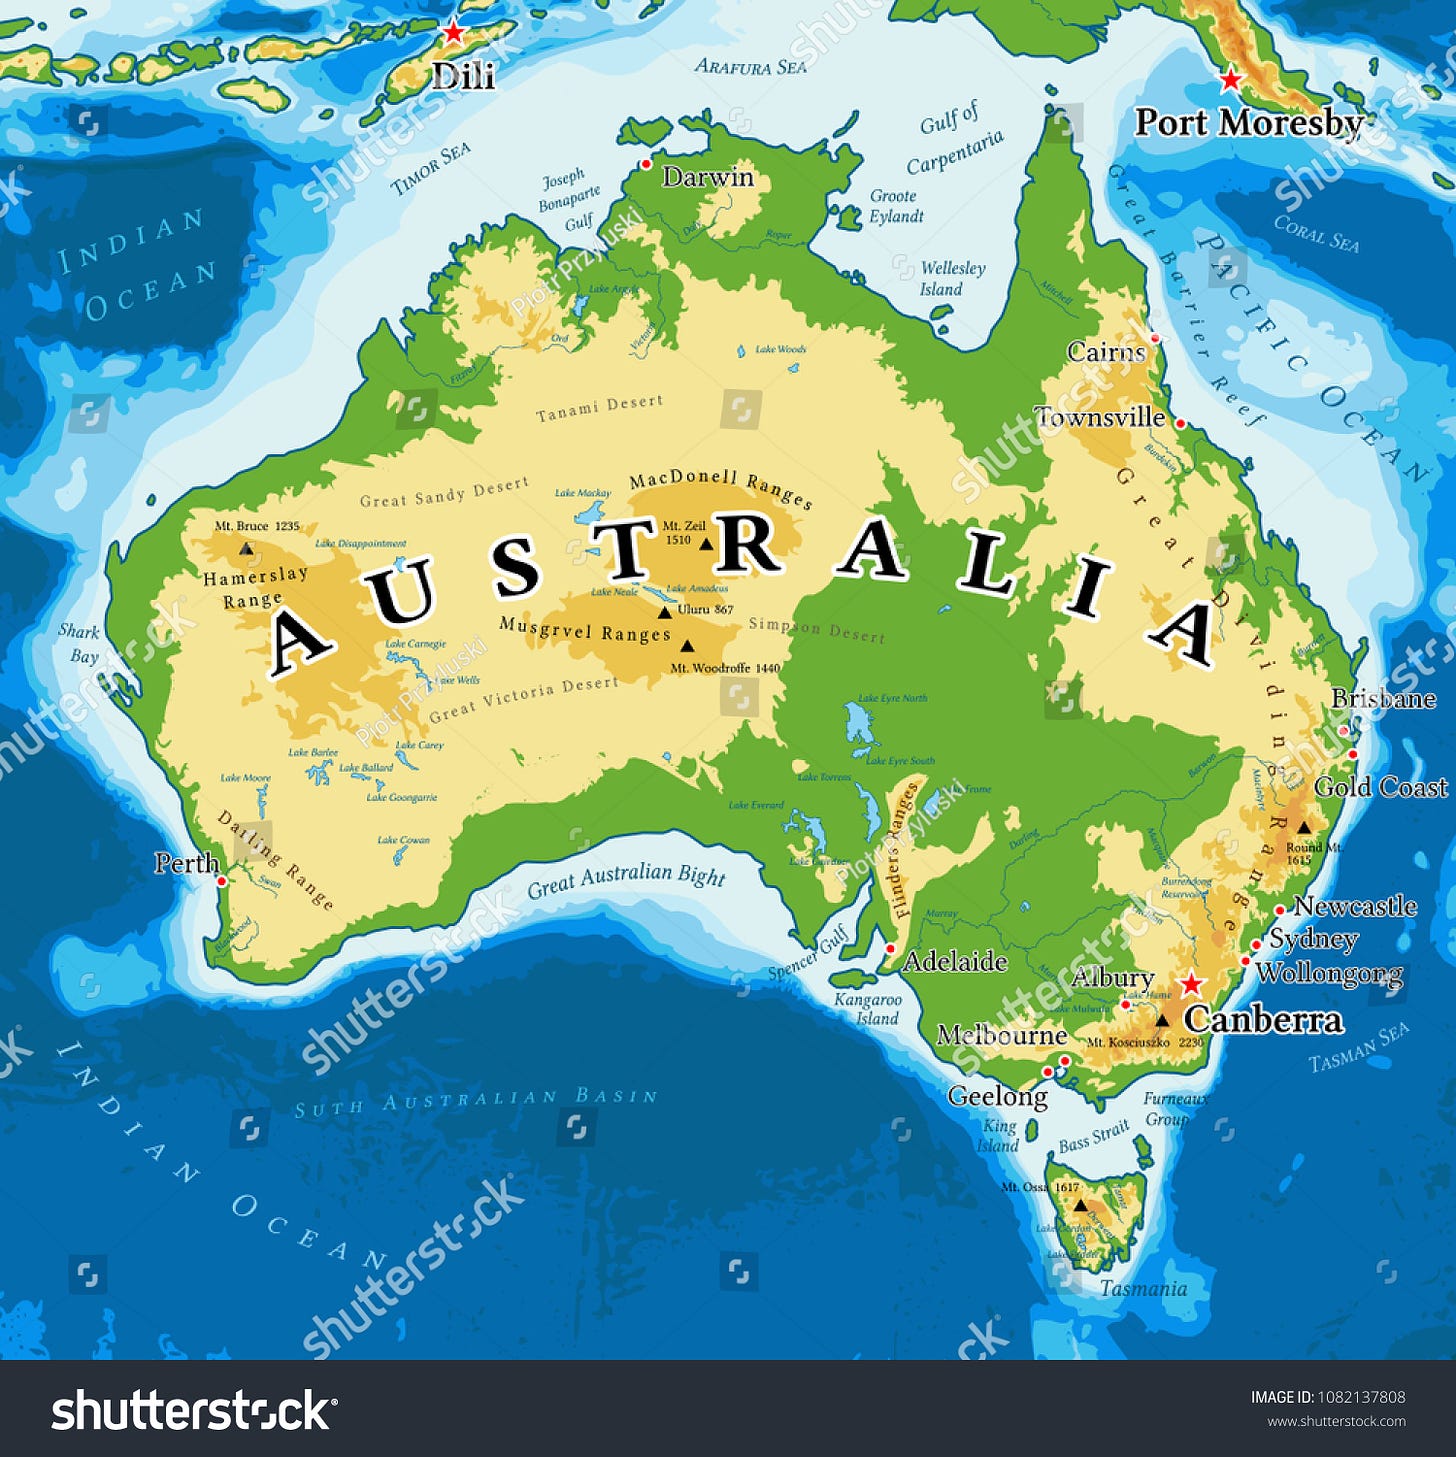 Australia physical map. Elements of image furnished by NASA.